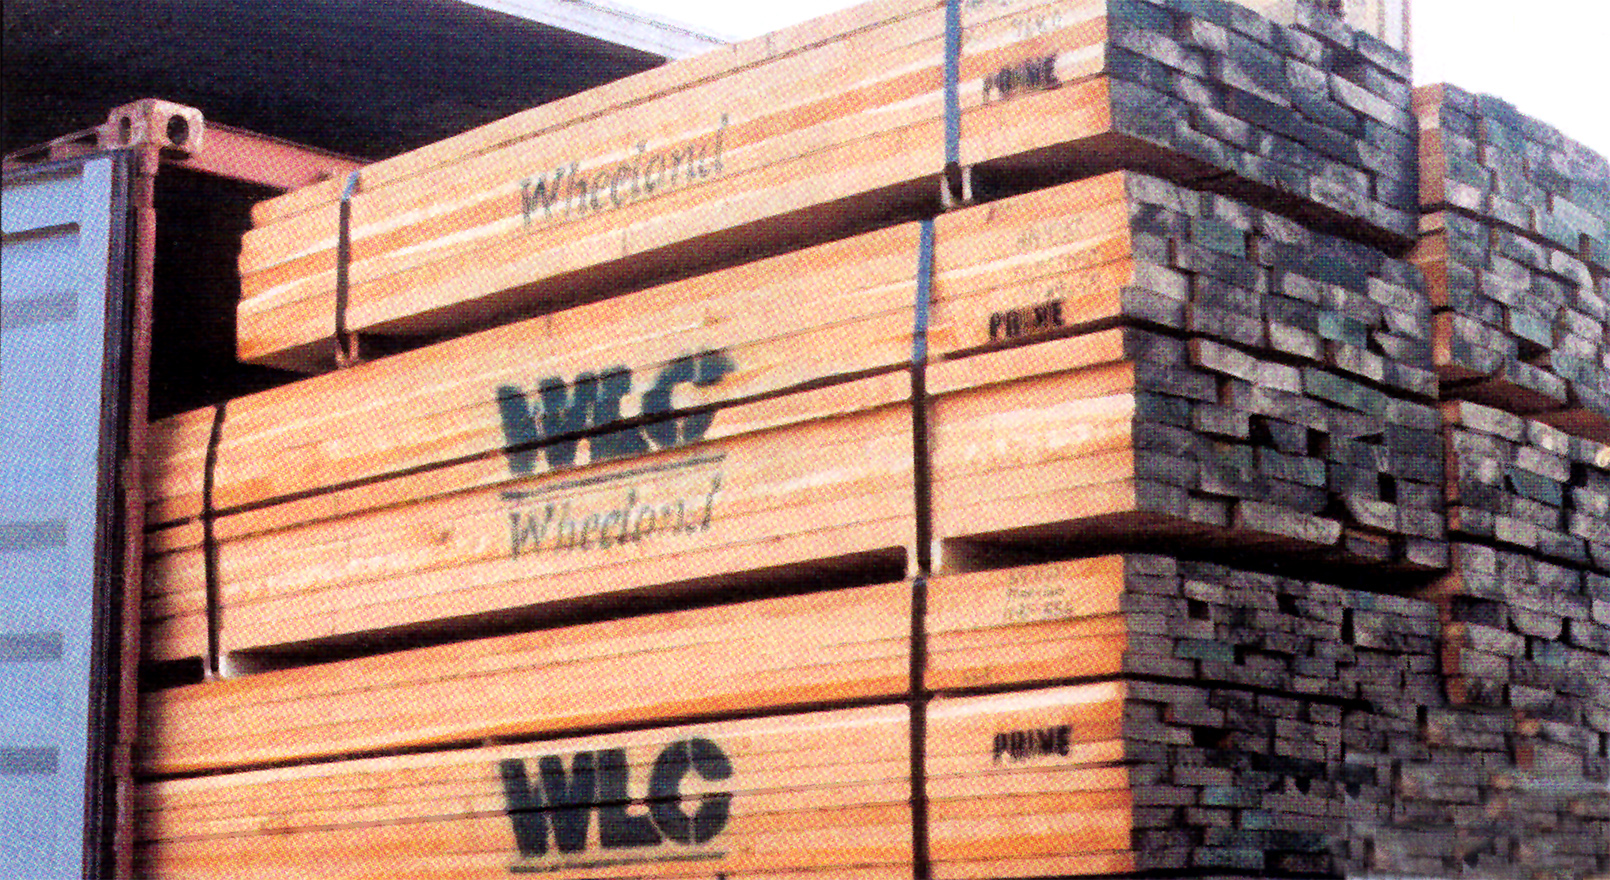 Wheeland Lumber Co. Continues Expansion